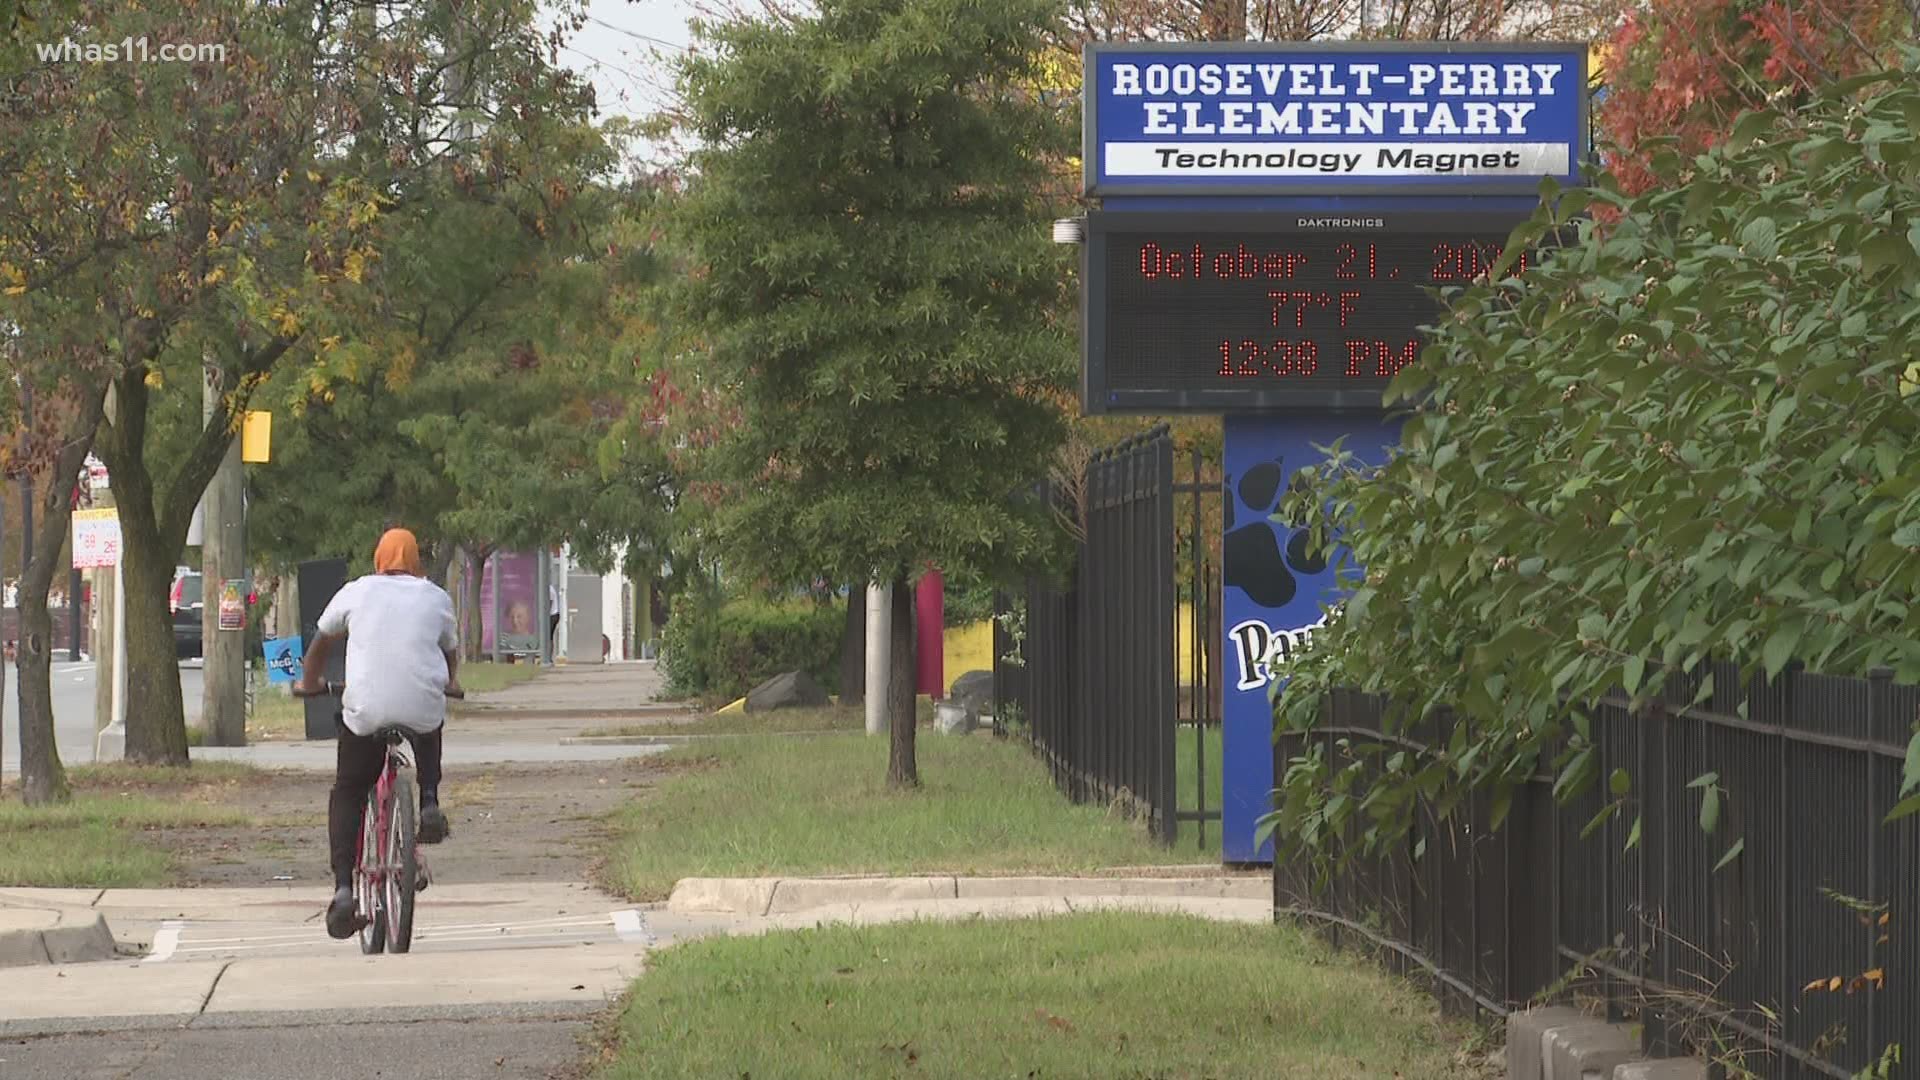 The JCPS Board voted to approve the purchase of land at 18th and Broadway to build a new elementary school.